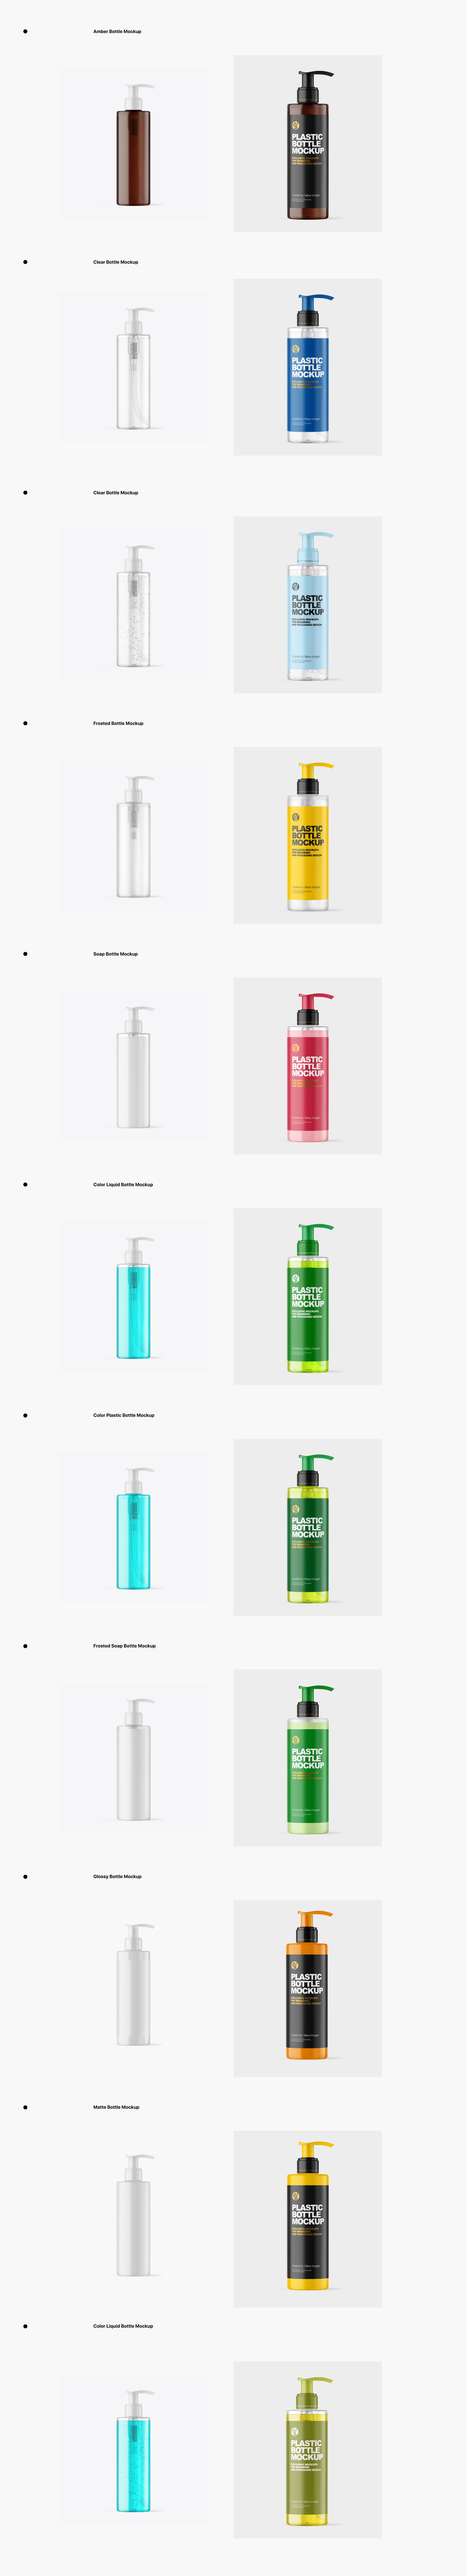 200 Ml Cosmetic Bottles With Pump Mockups Psd On Behance